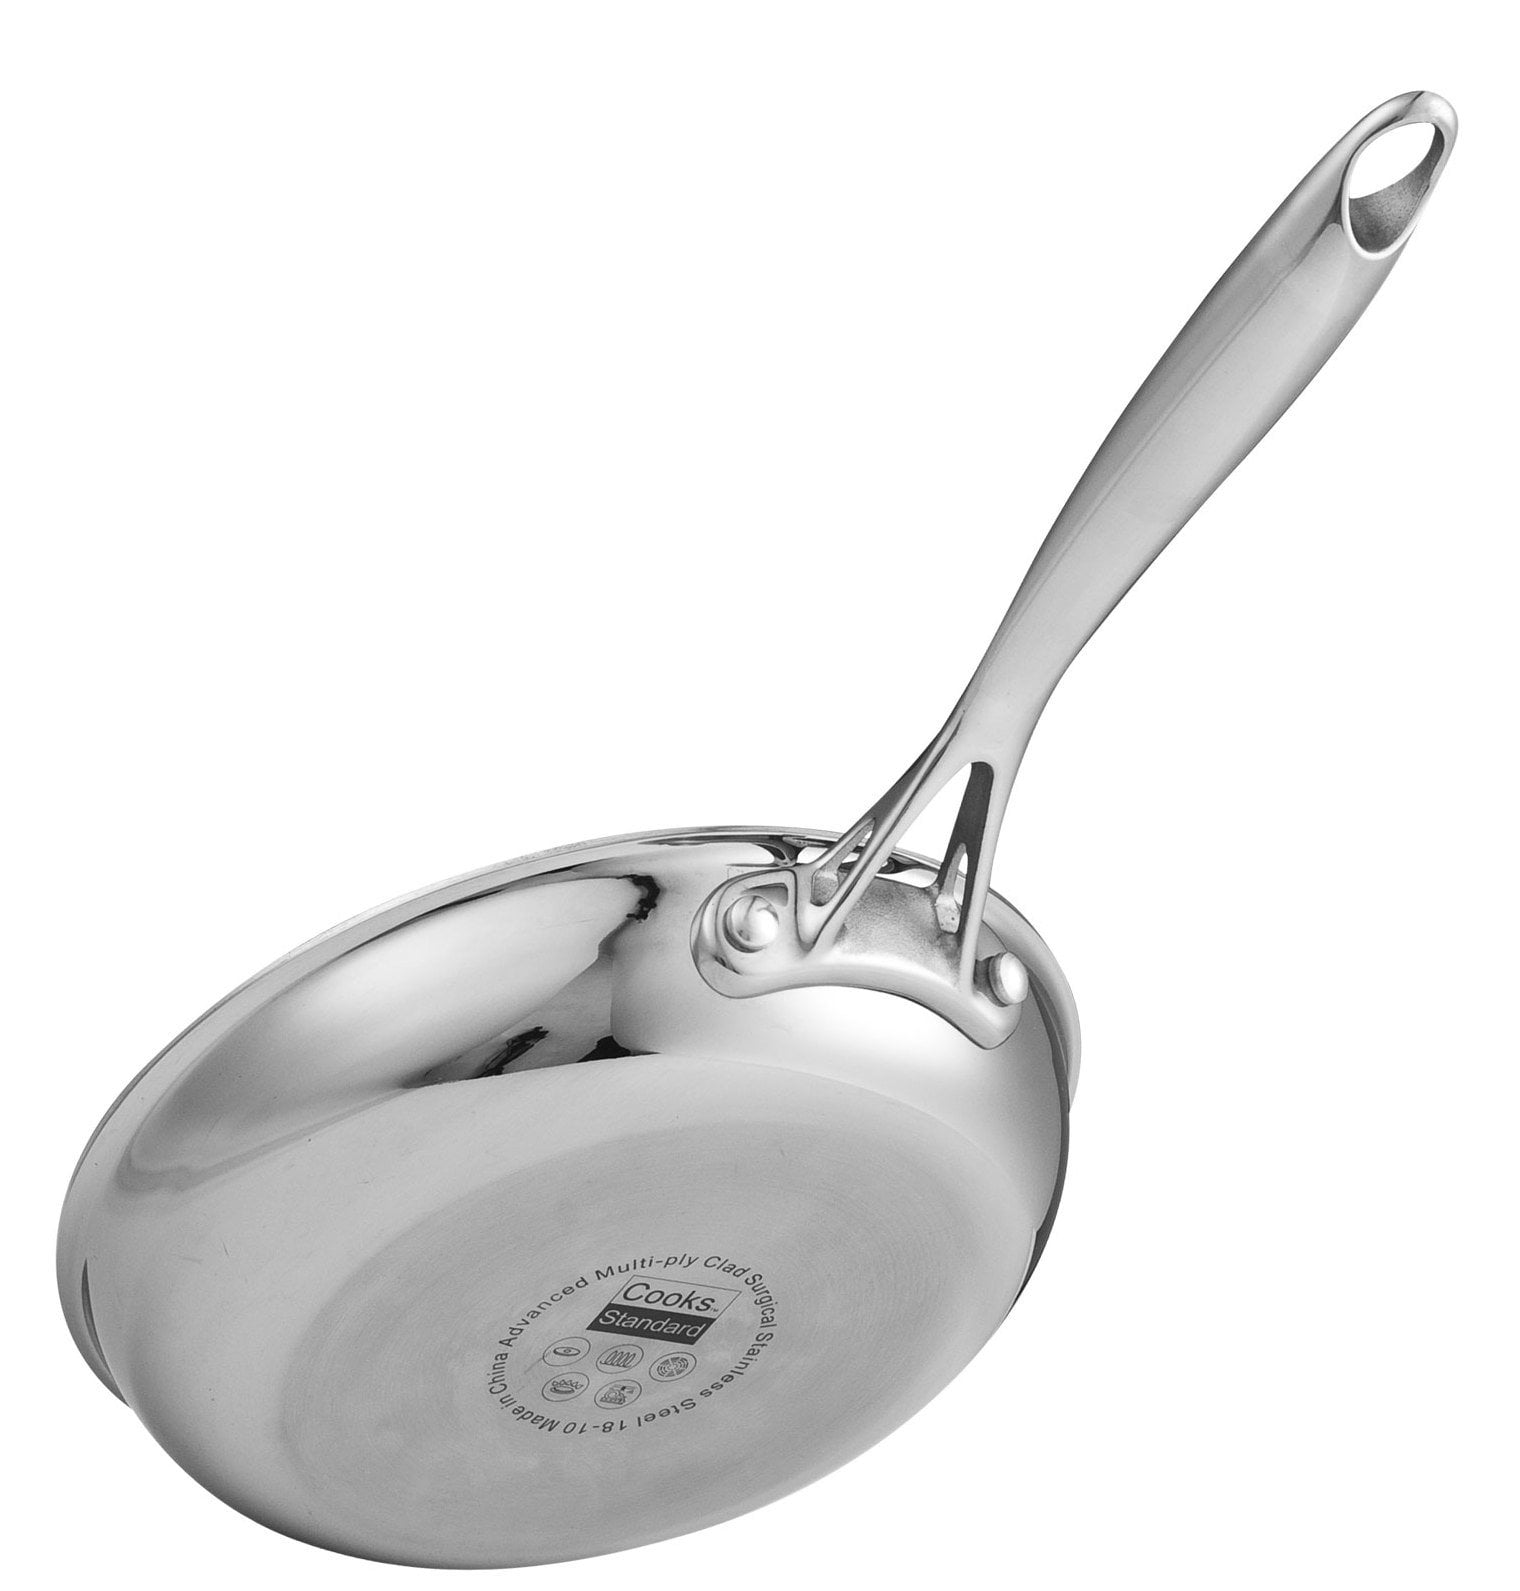 All-Clad 5108 Stainless 8-Inch Fry Pan Silver